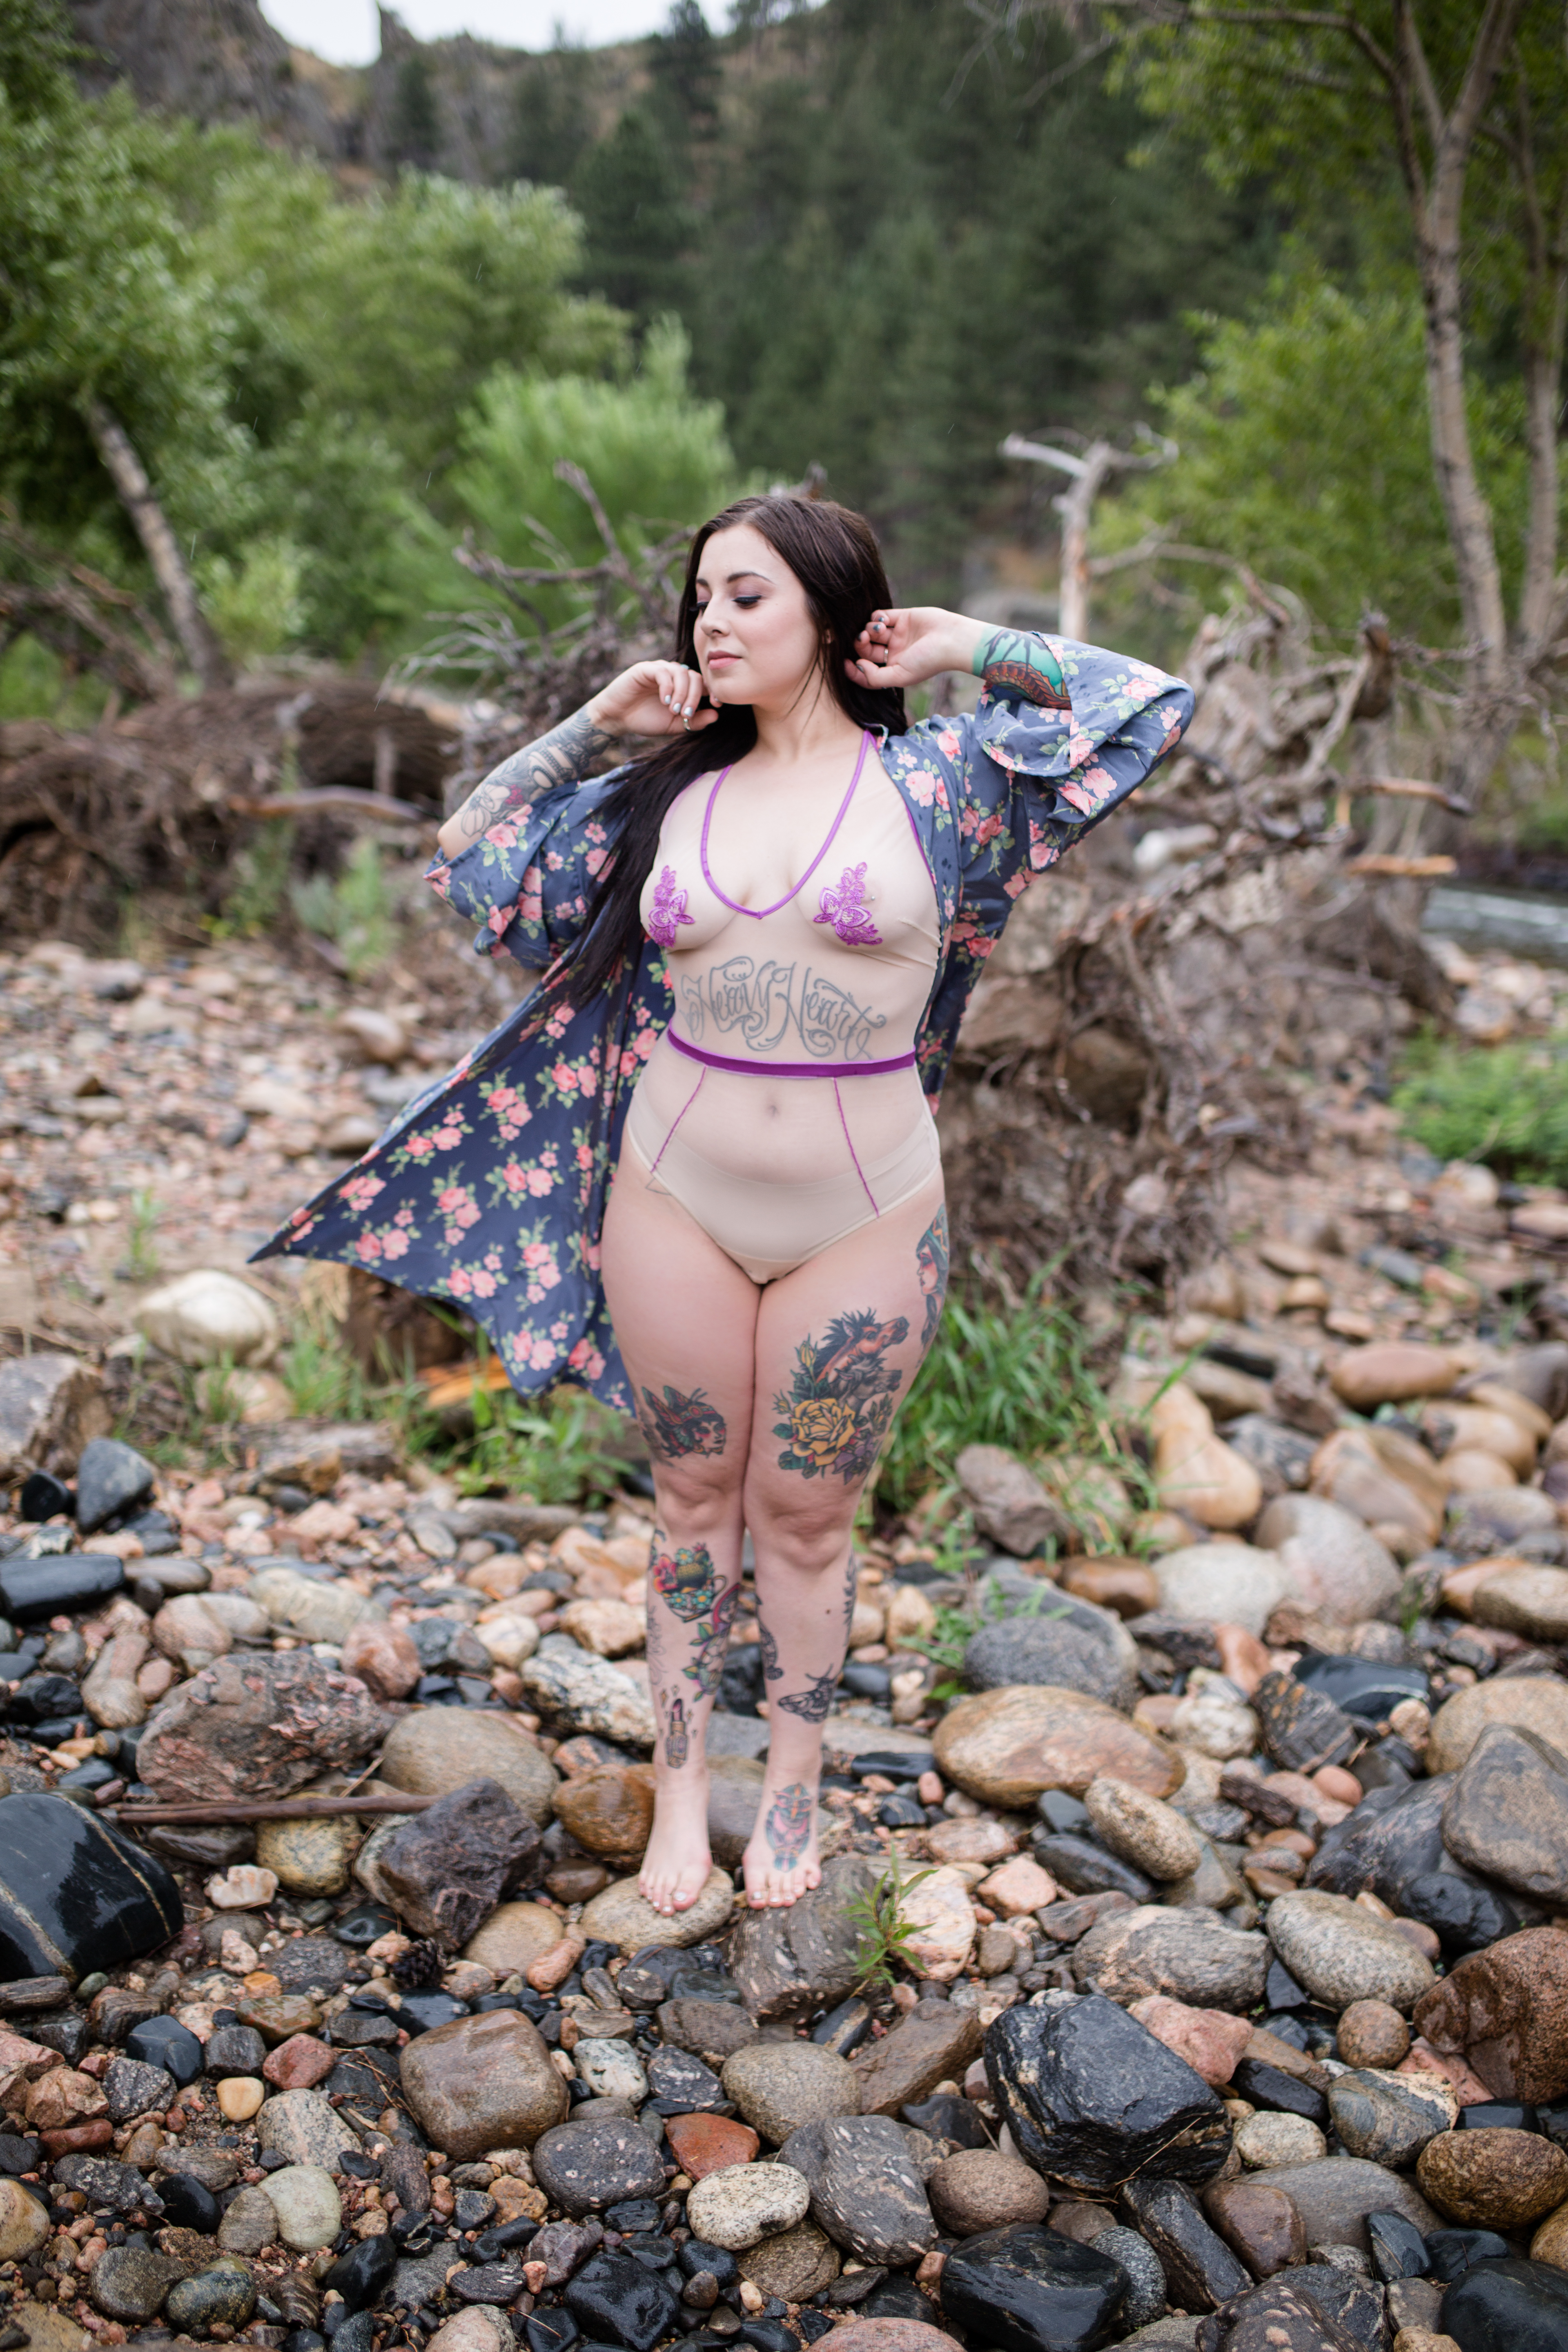 https://lilacandfernphotography.com/wp-content/uploads/2017/08/Boudoir-Fort-Collins-Colorado-Lilac-and-Fern-LE-7.jpg